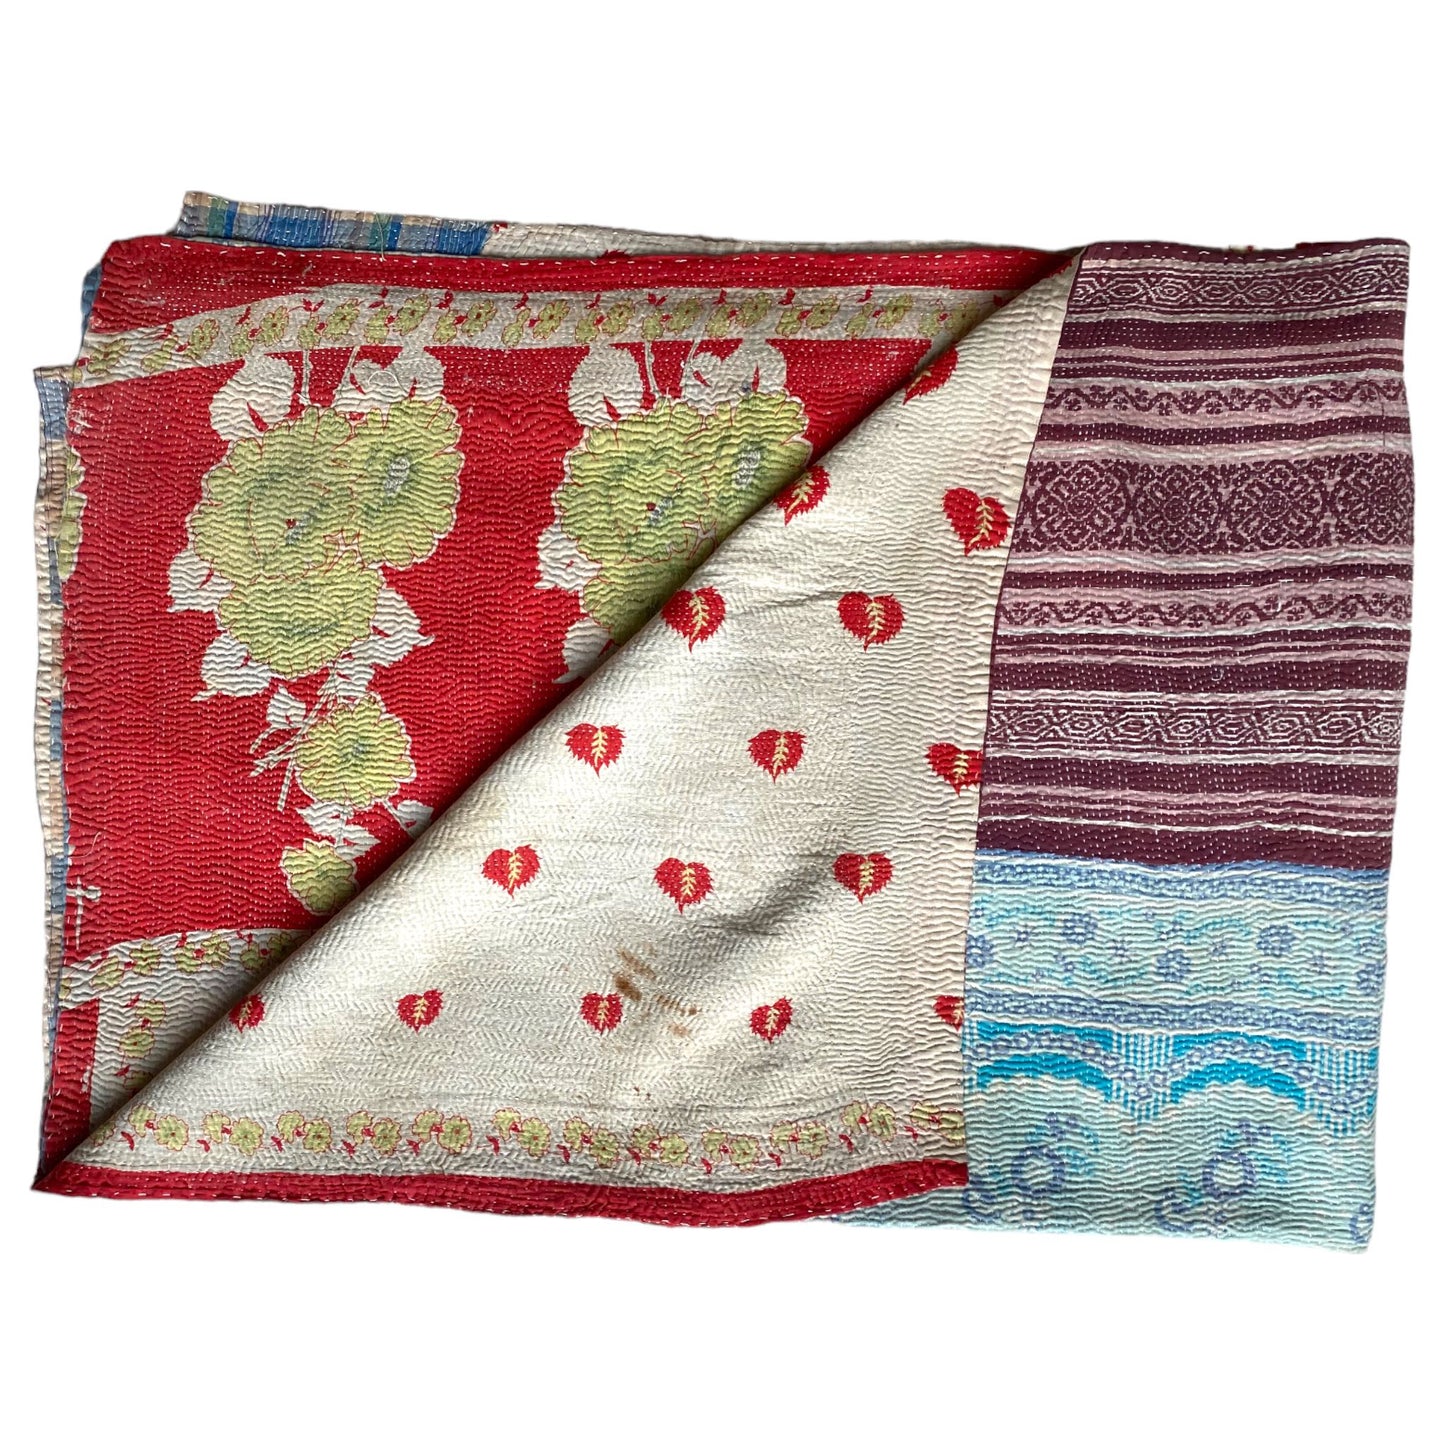 Red and white kantha quilt folded